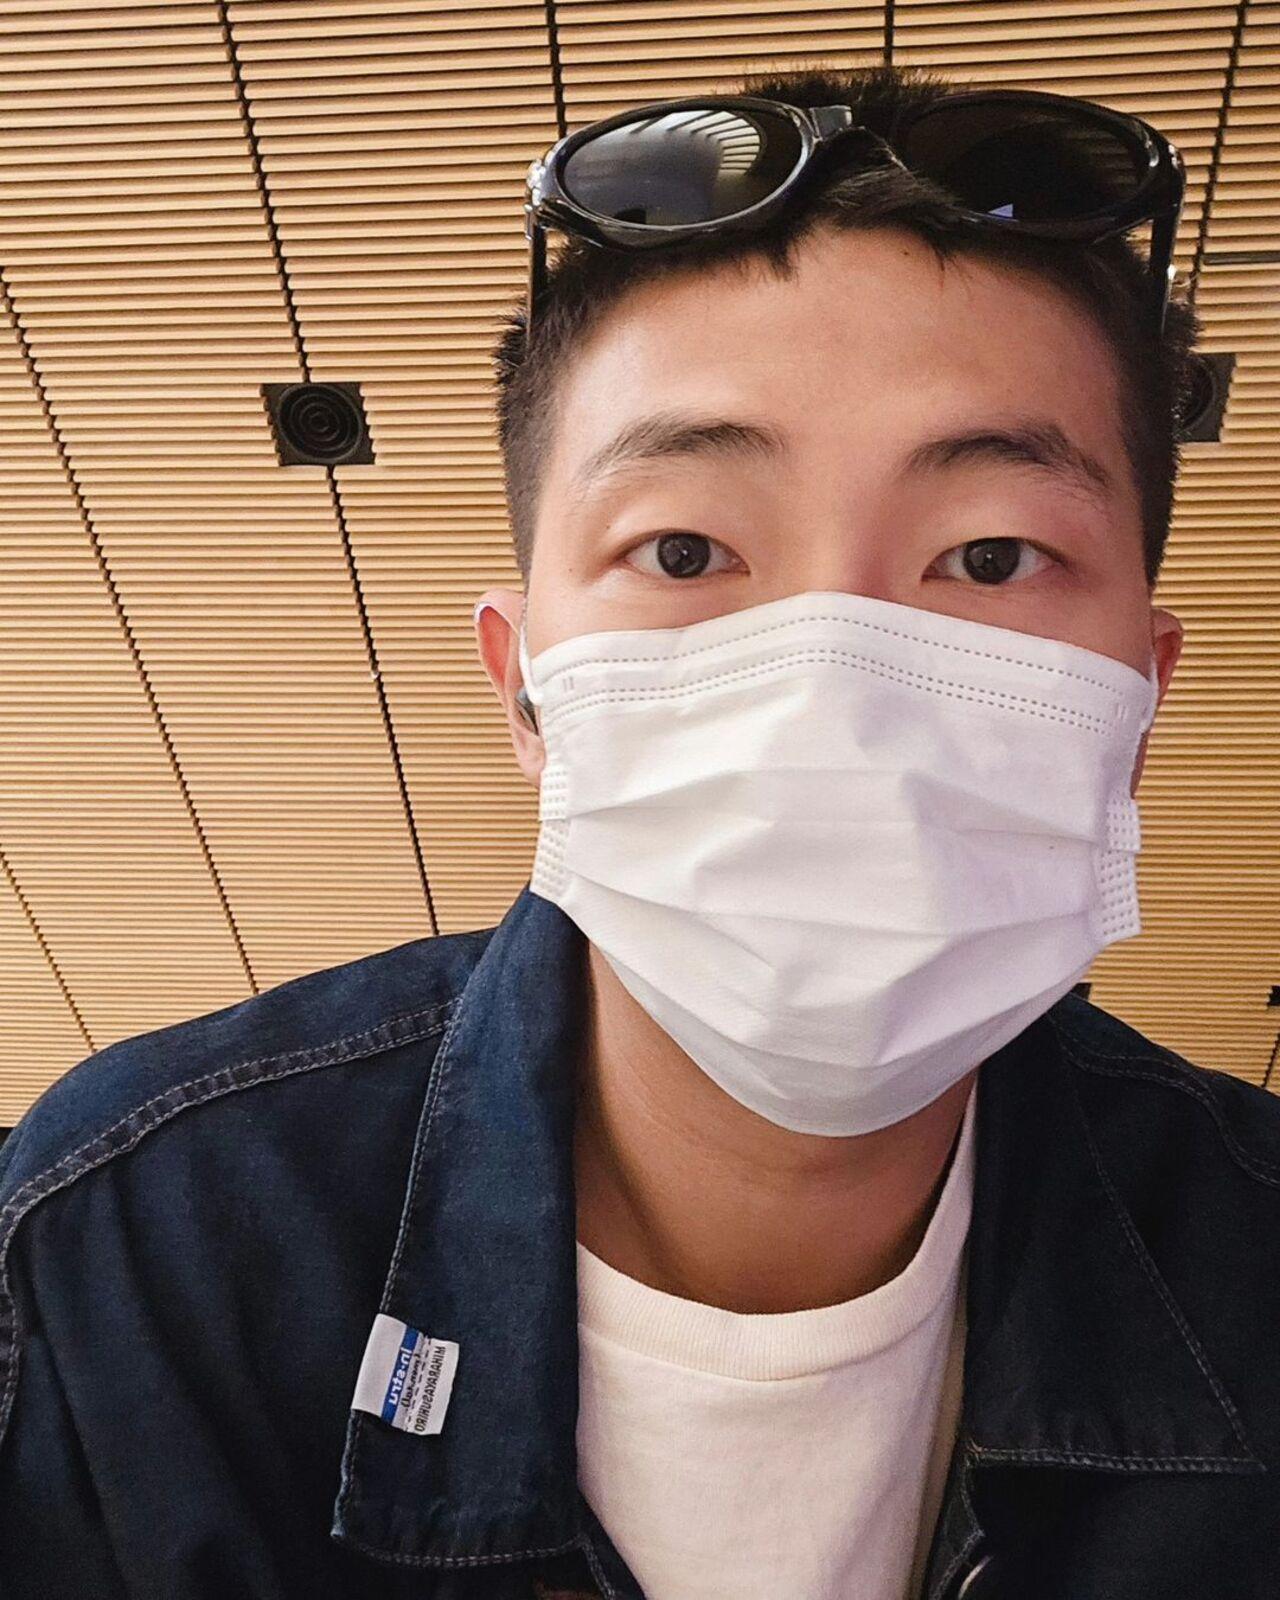 South Korean boy band BTS' leader RM aka Kim Nam-joon, dropped a series of pictures on Instagram. 